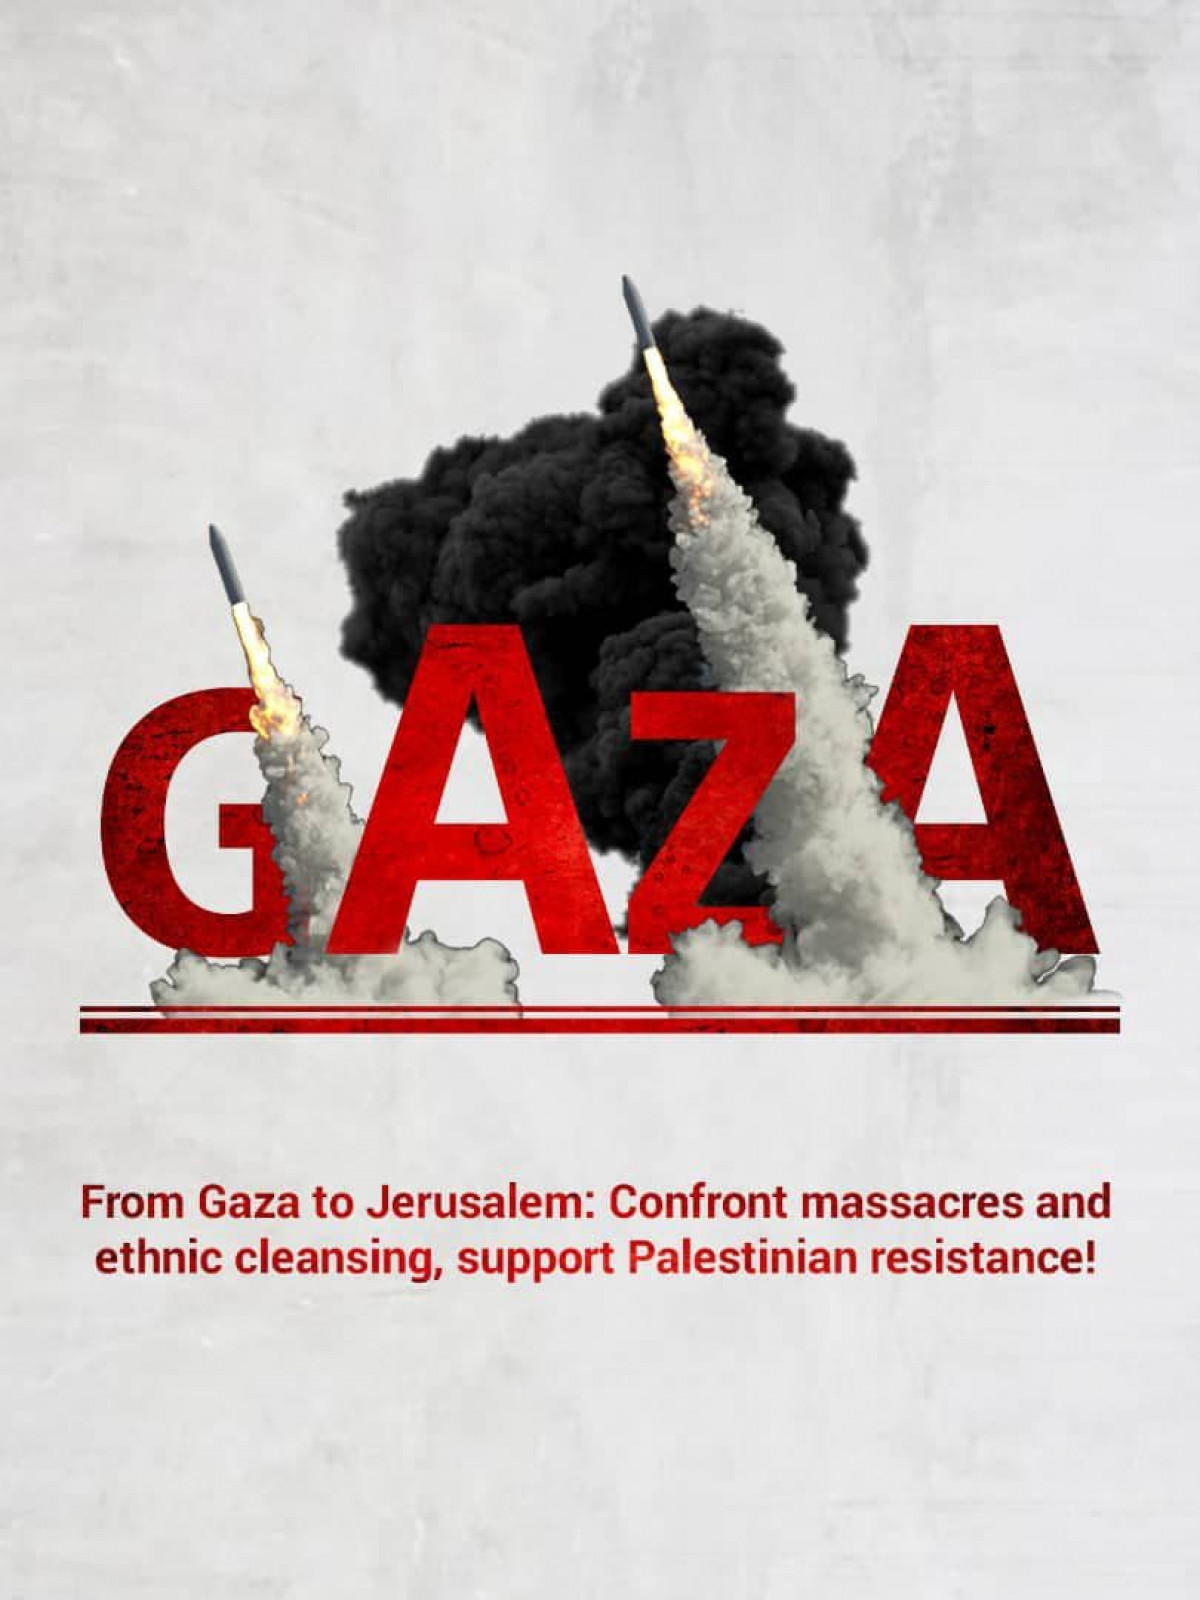 From gaza to jerusalem: Confront massacres and ethnic cleansing, support palestinian resistance!